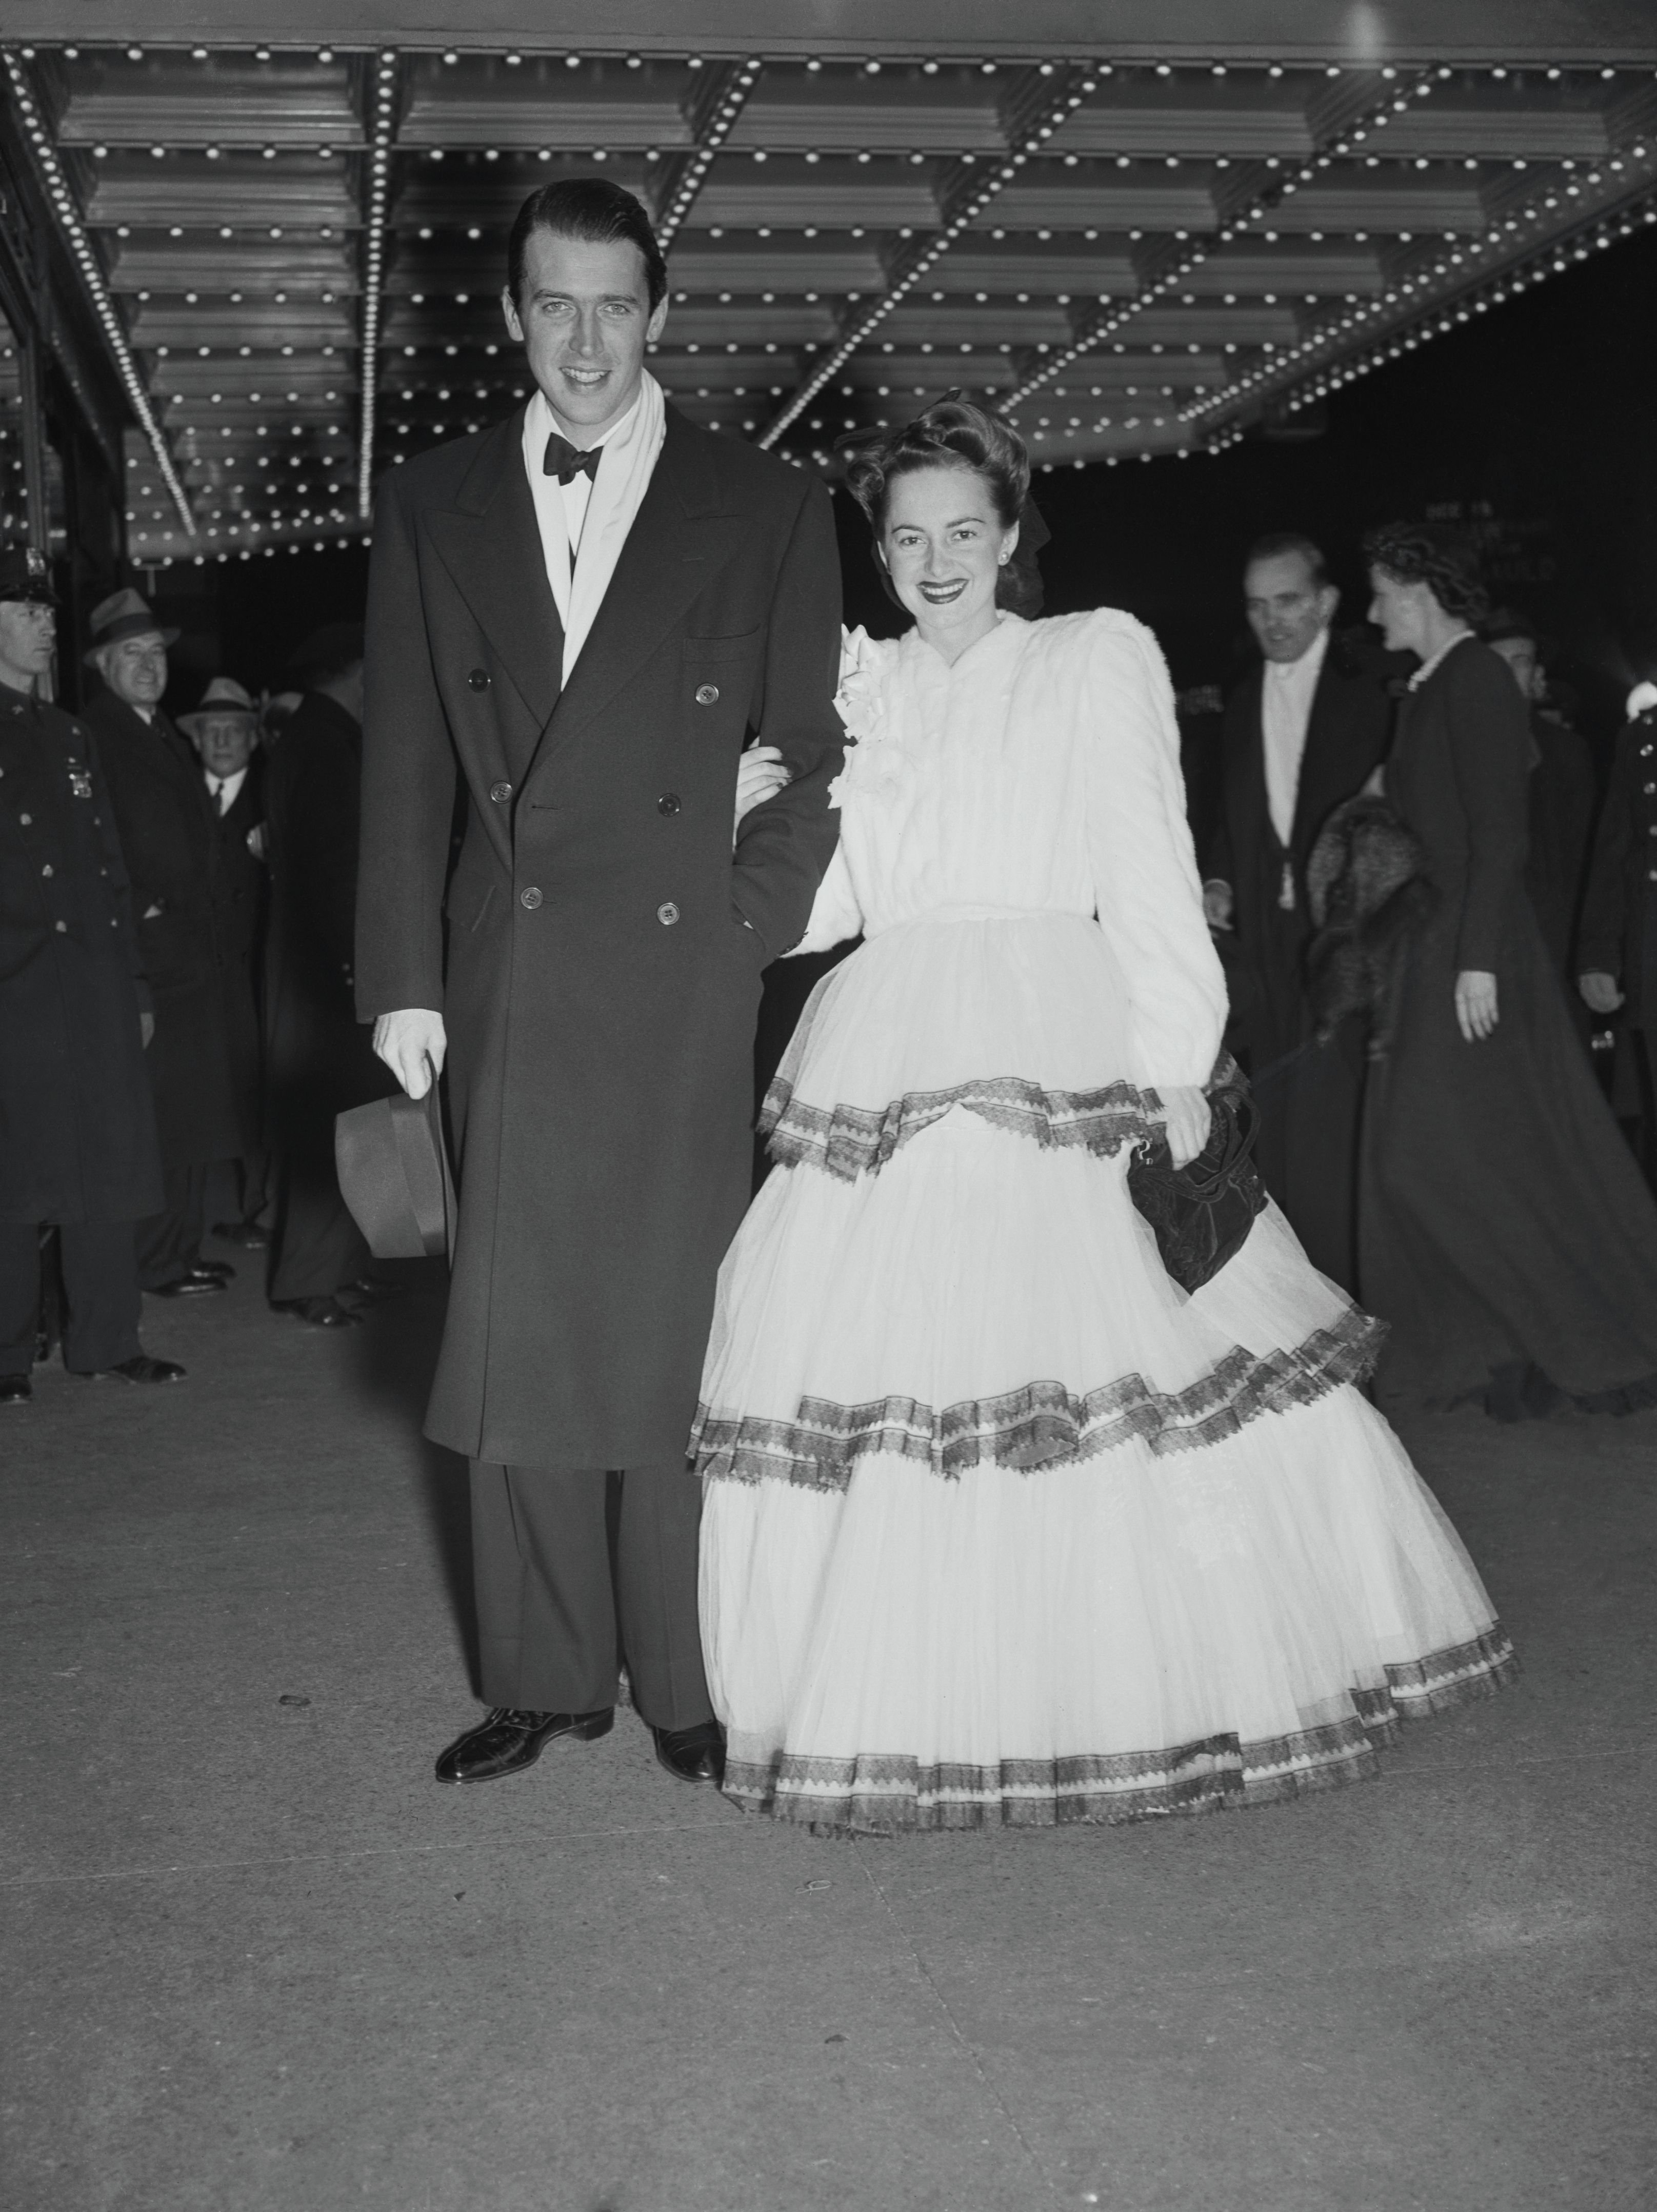 James Stewart and Olivia De Havilland at the New York opening of the "Gone With The Wind," on December 19, 1939. | Source: Bettmann/Getty Images